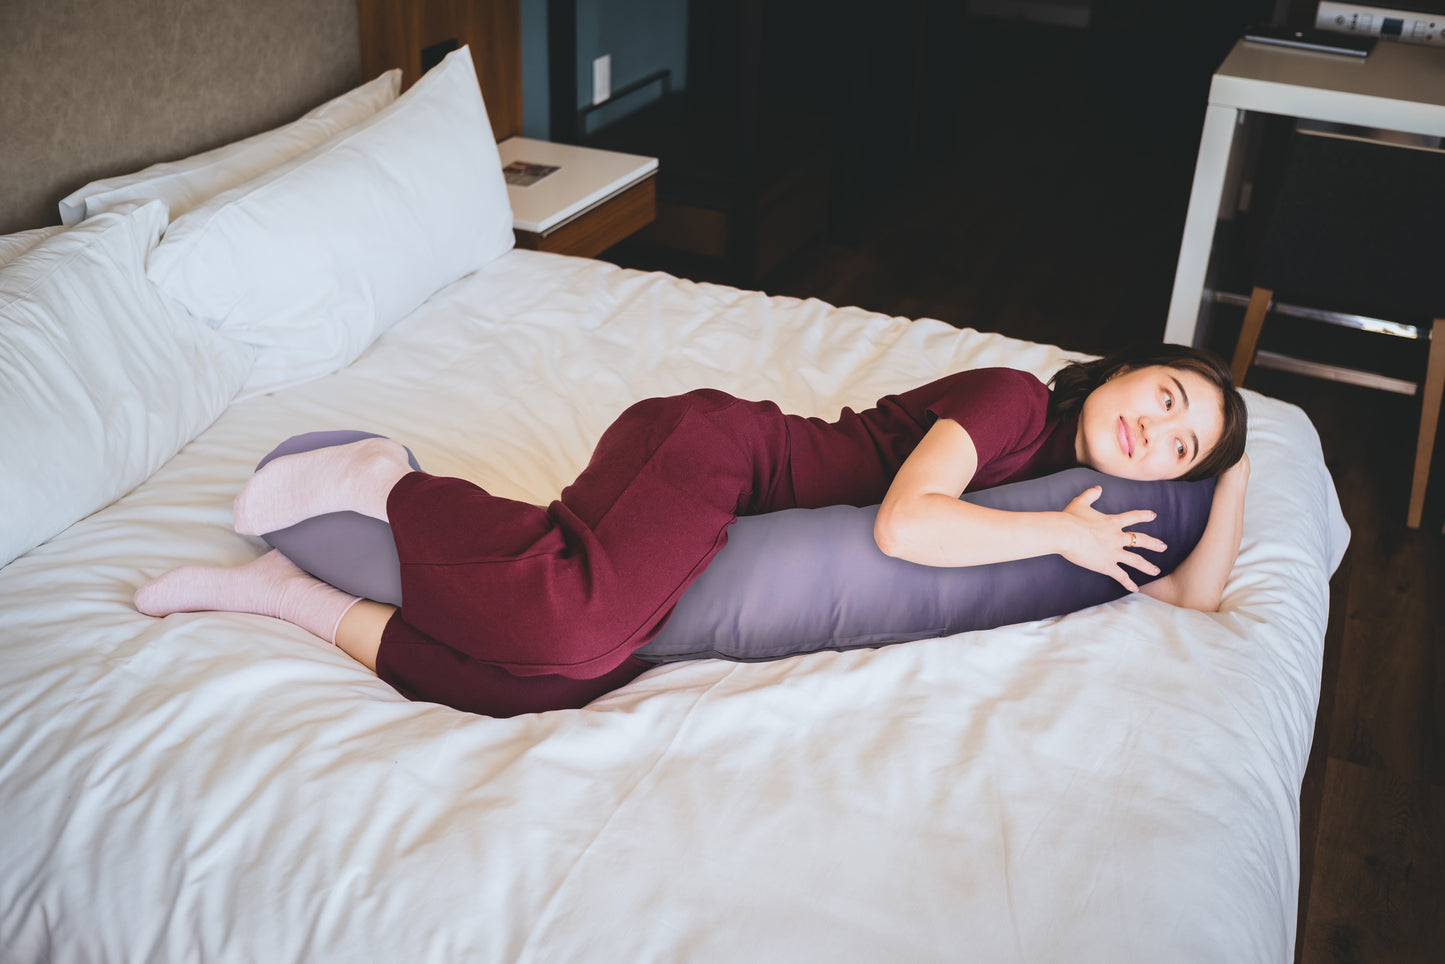 Woman lying on bed with hiamom body pillow as a support